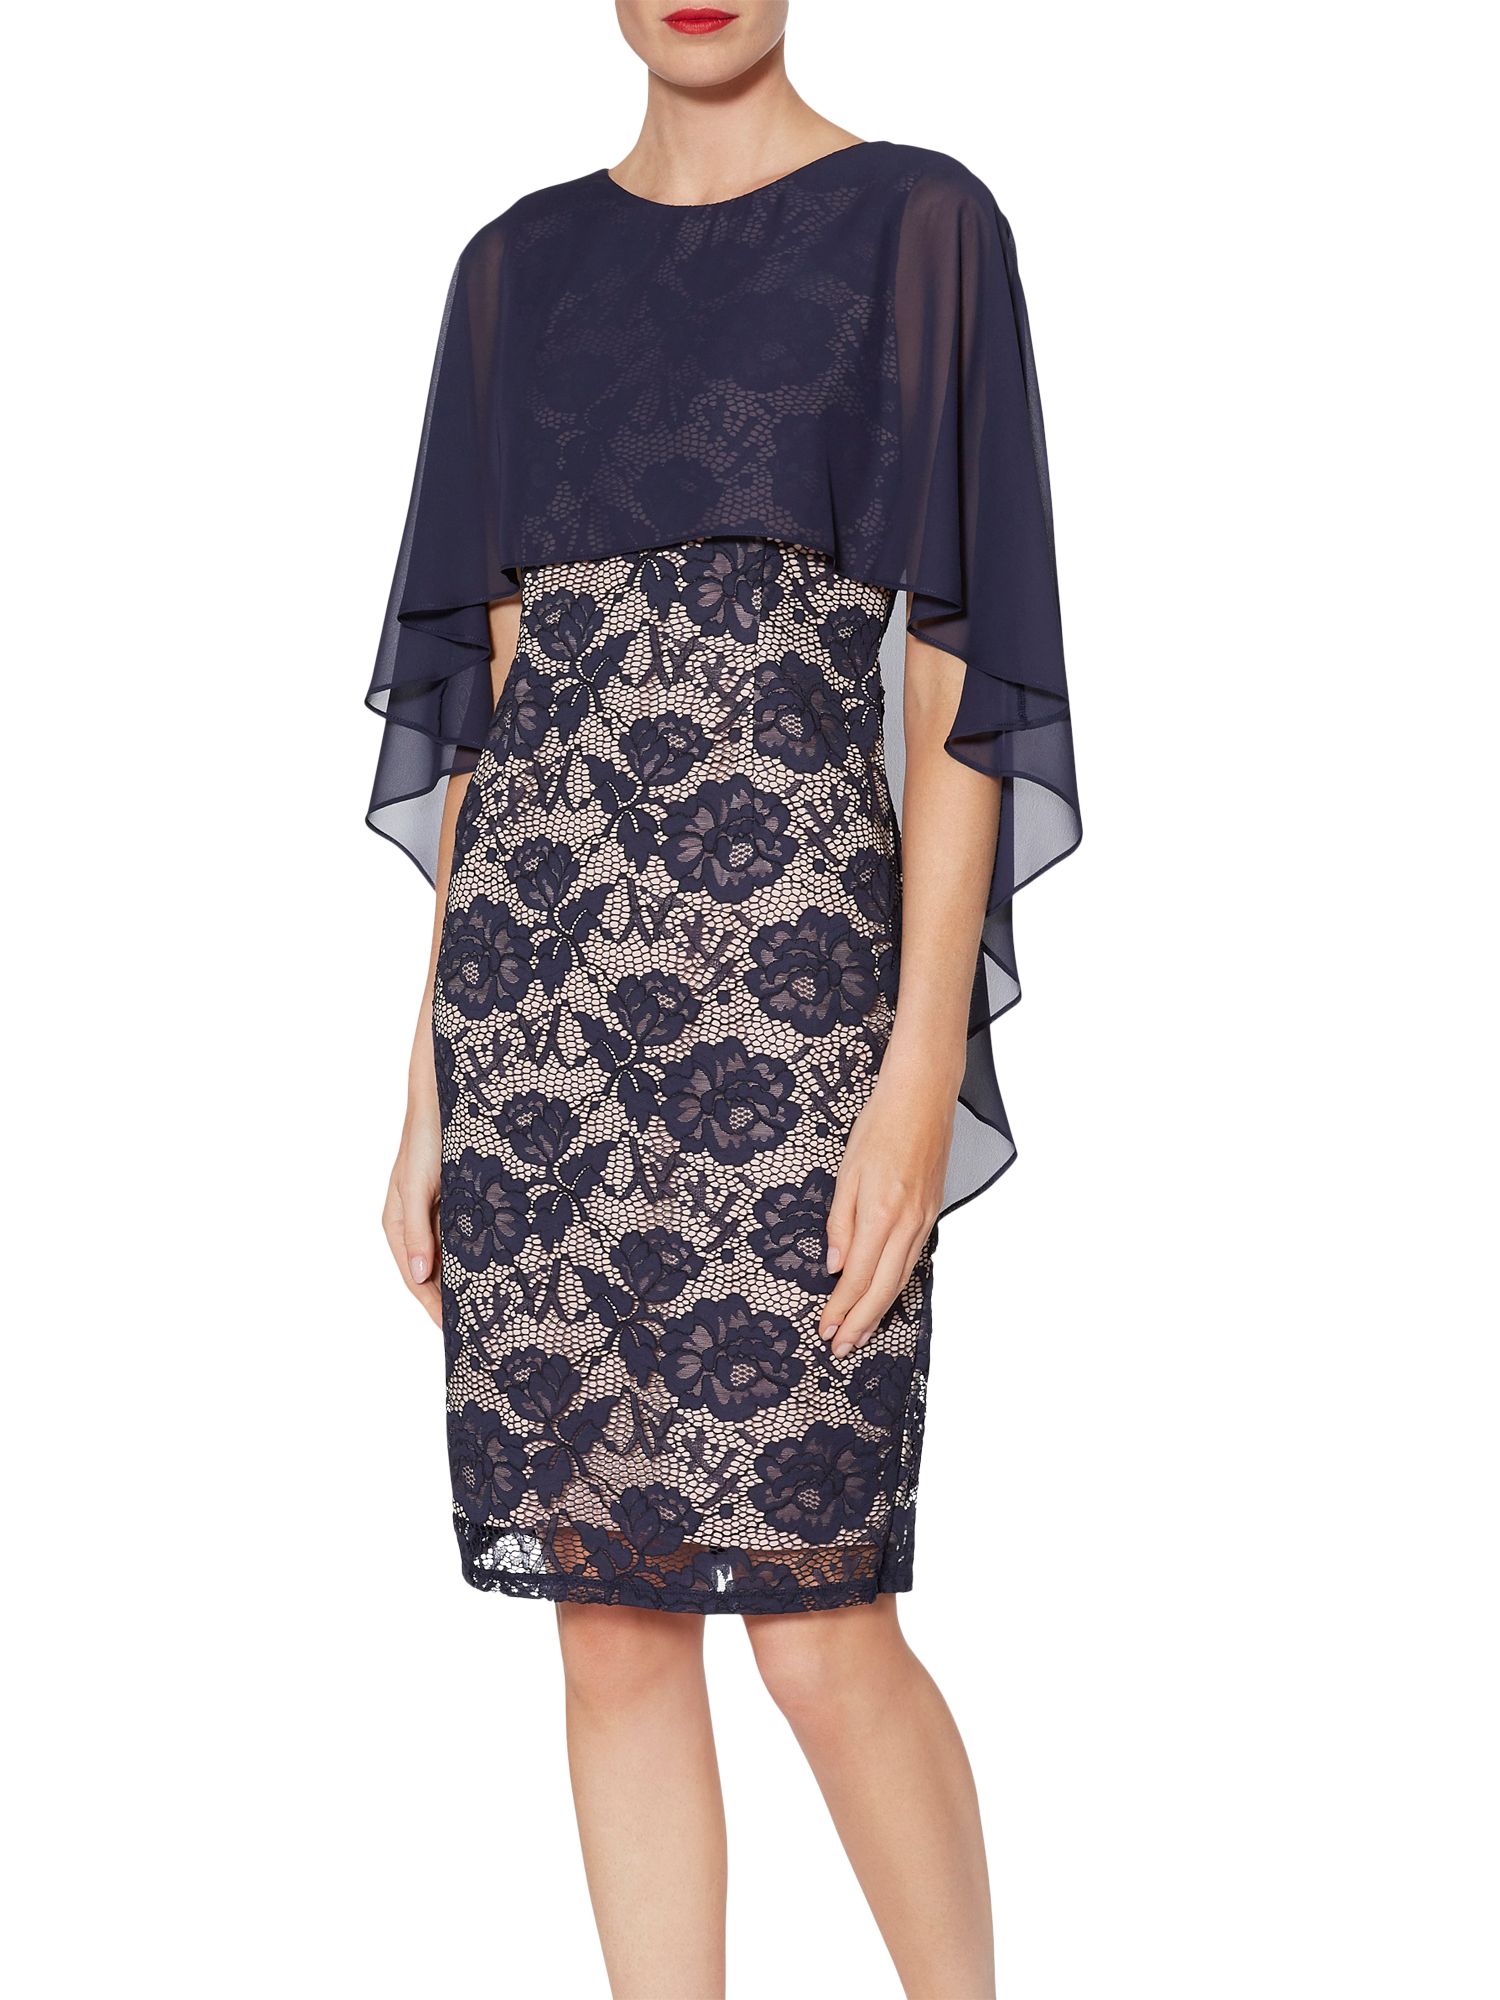 Gina Bacconi Minnie Floral Embroidery Dress, Navy at John Lewis & Partners